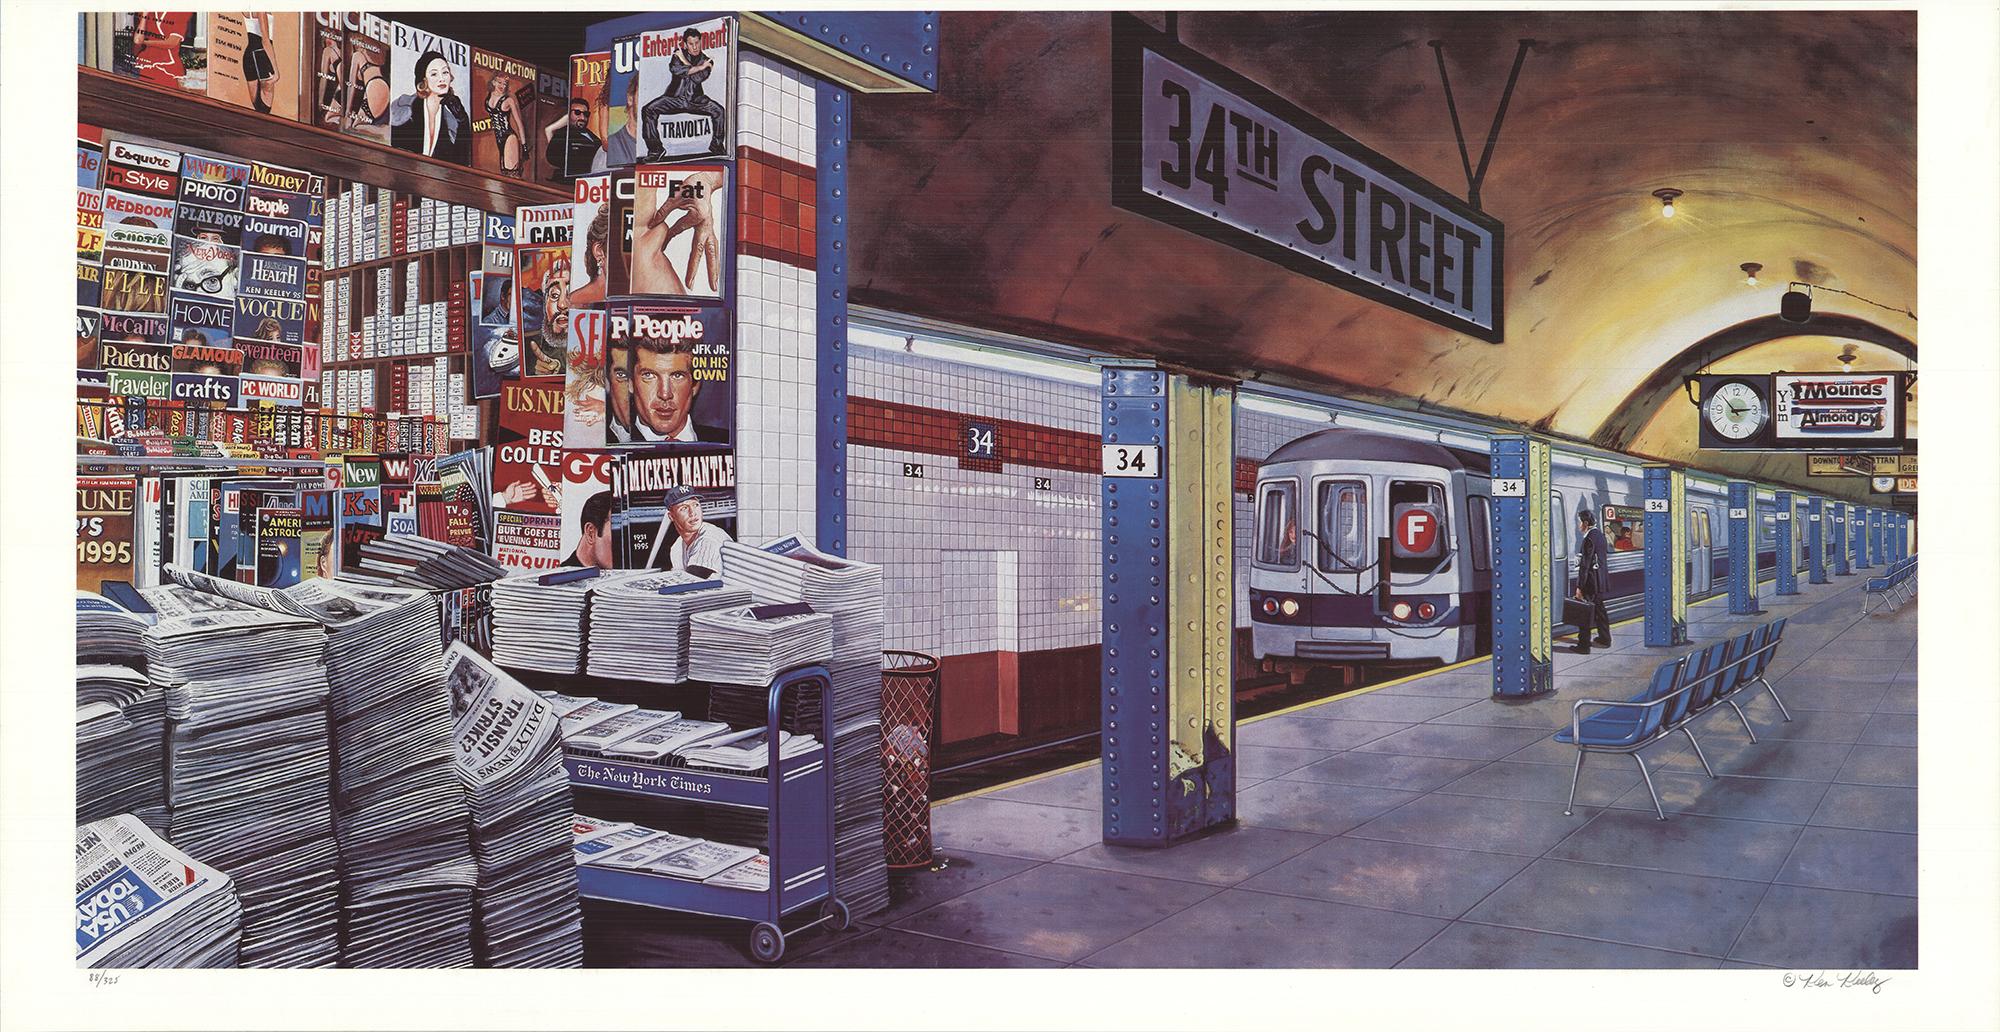 F train at 34th Street, New York  - Print by Ken Keeley